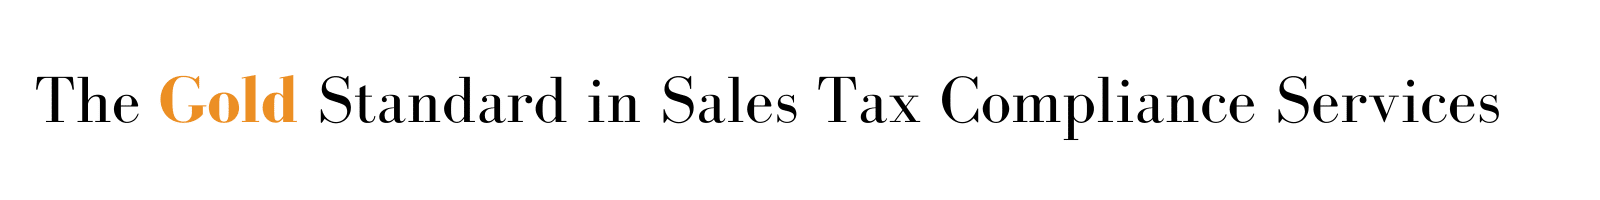 sales tax compliance services